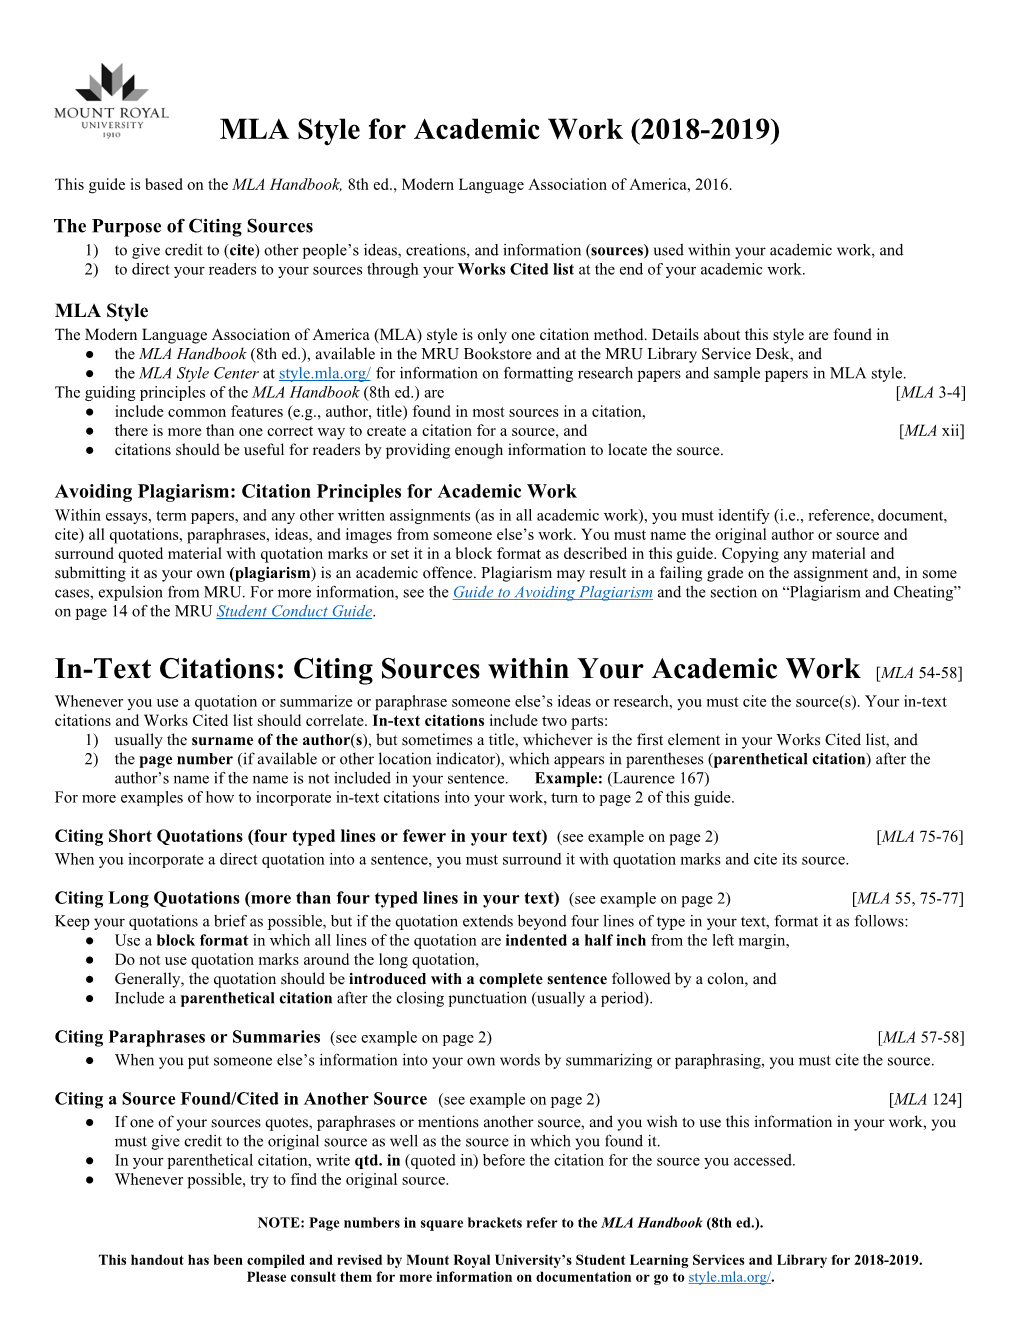 MLA Style for Academic Work (2018-2019) In-Text Citations